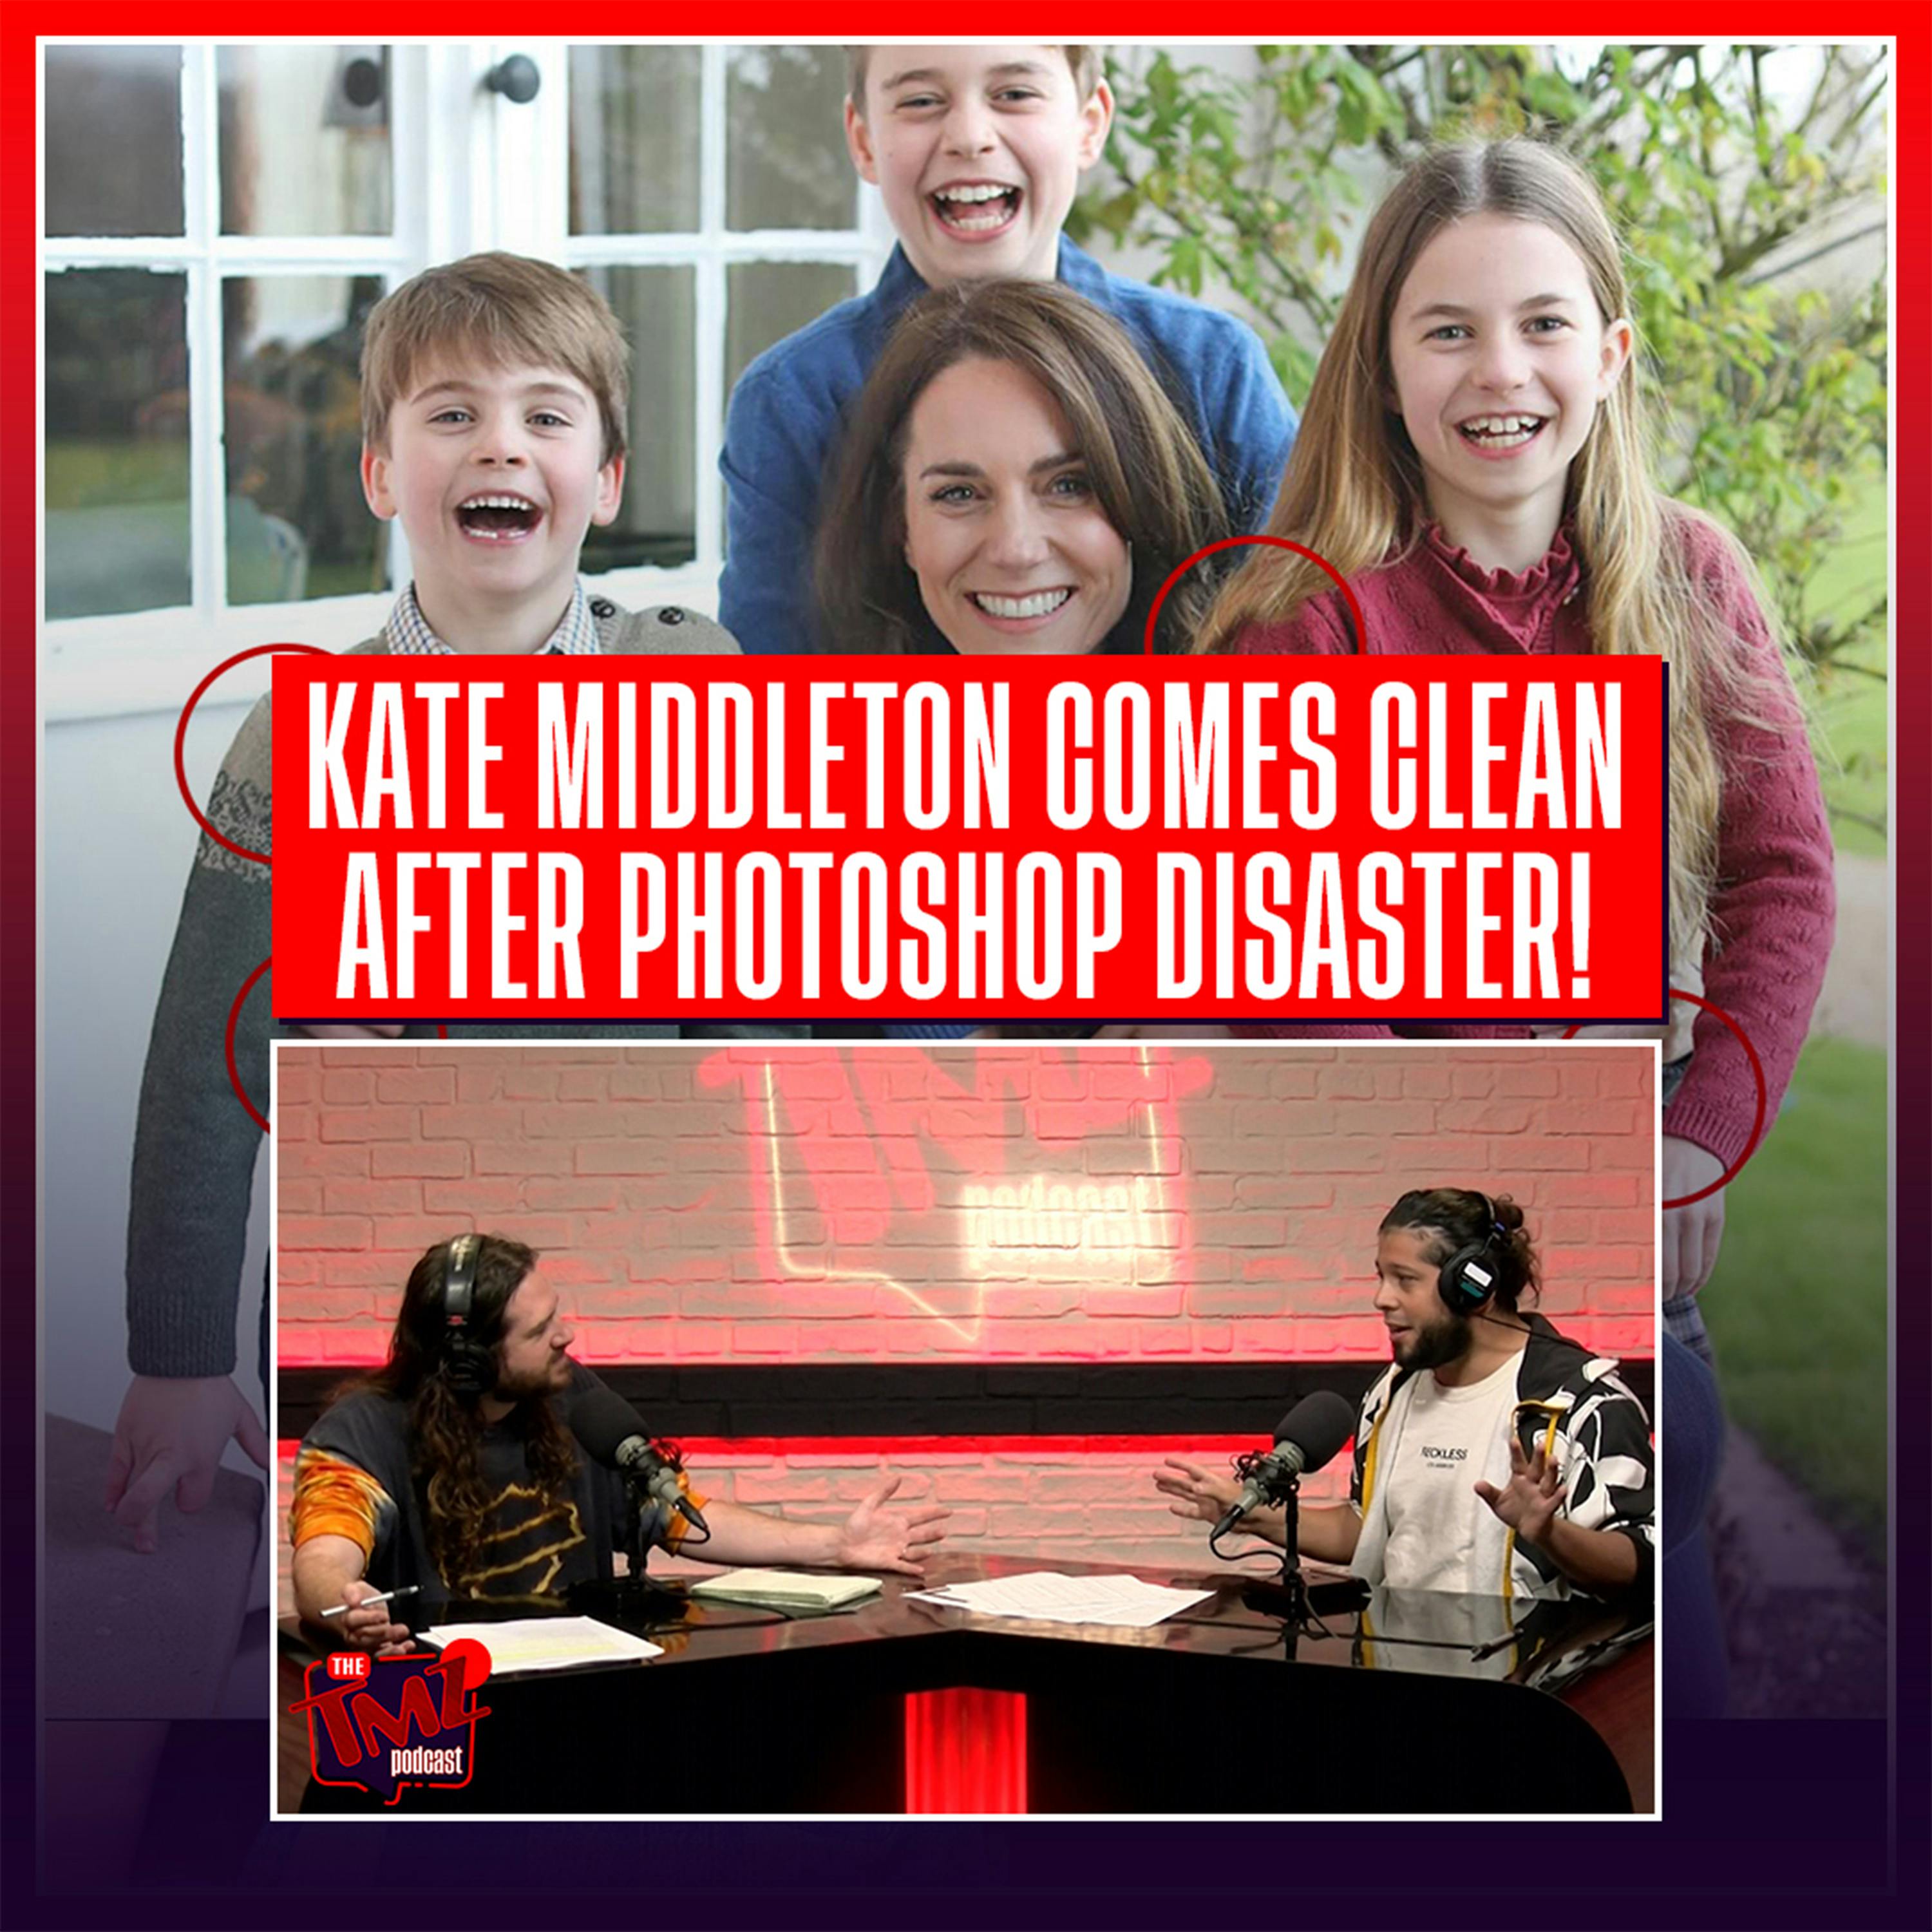 Kate Middleton Comes Clean After Photoshop Disaster!